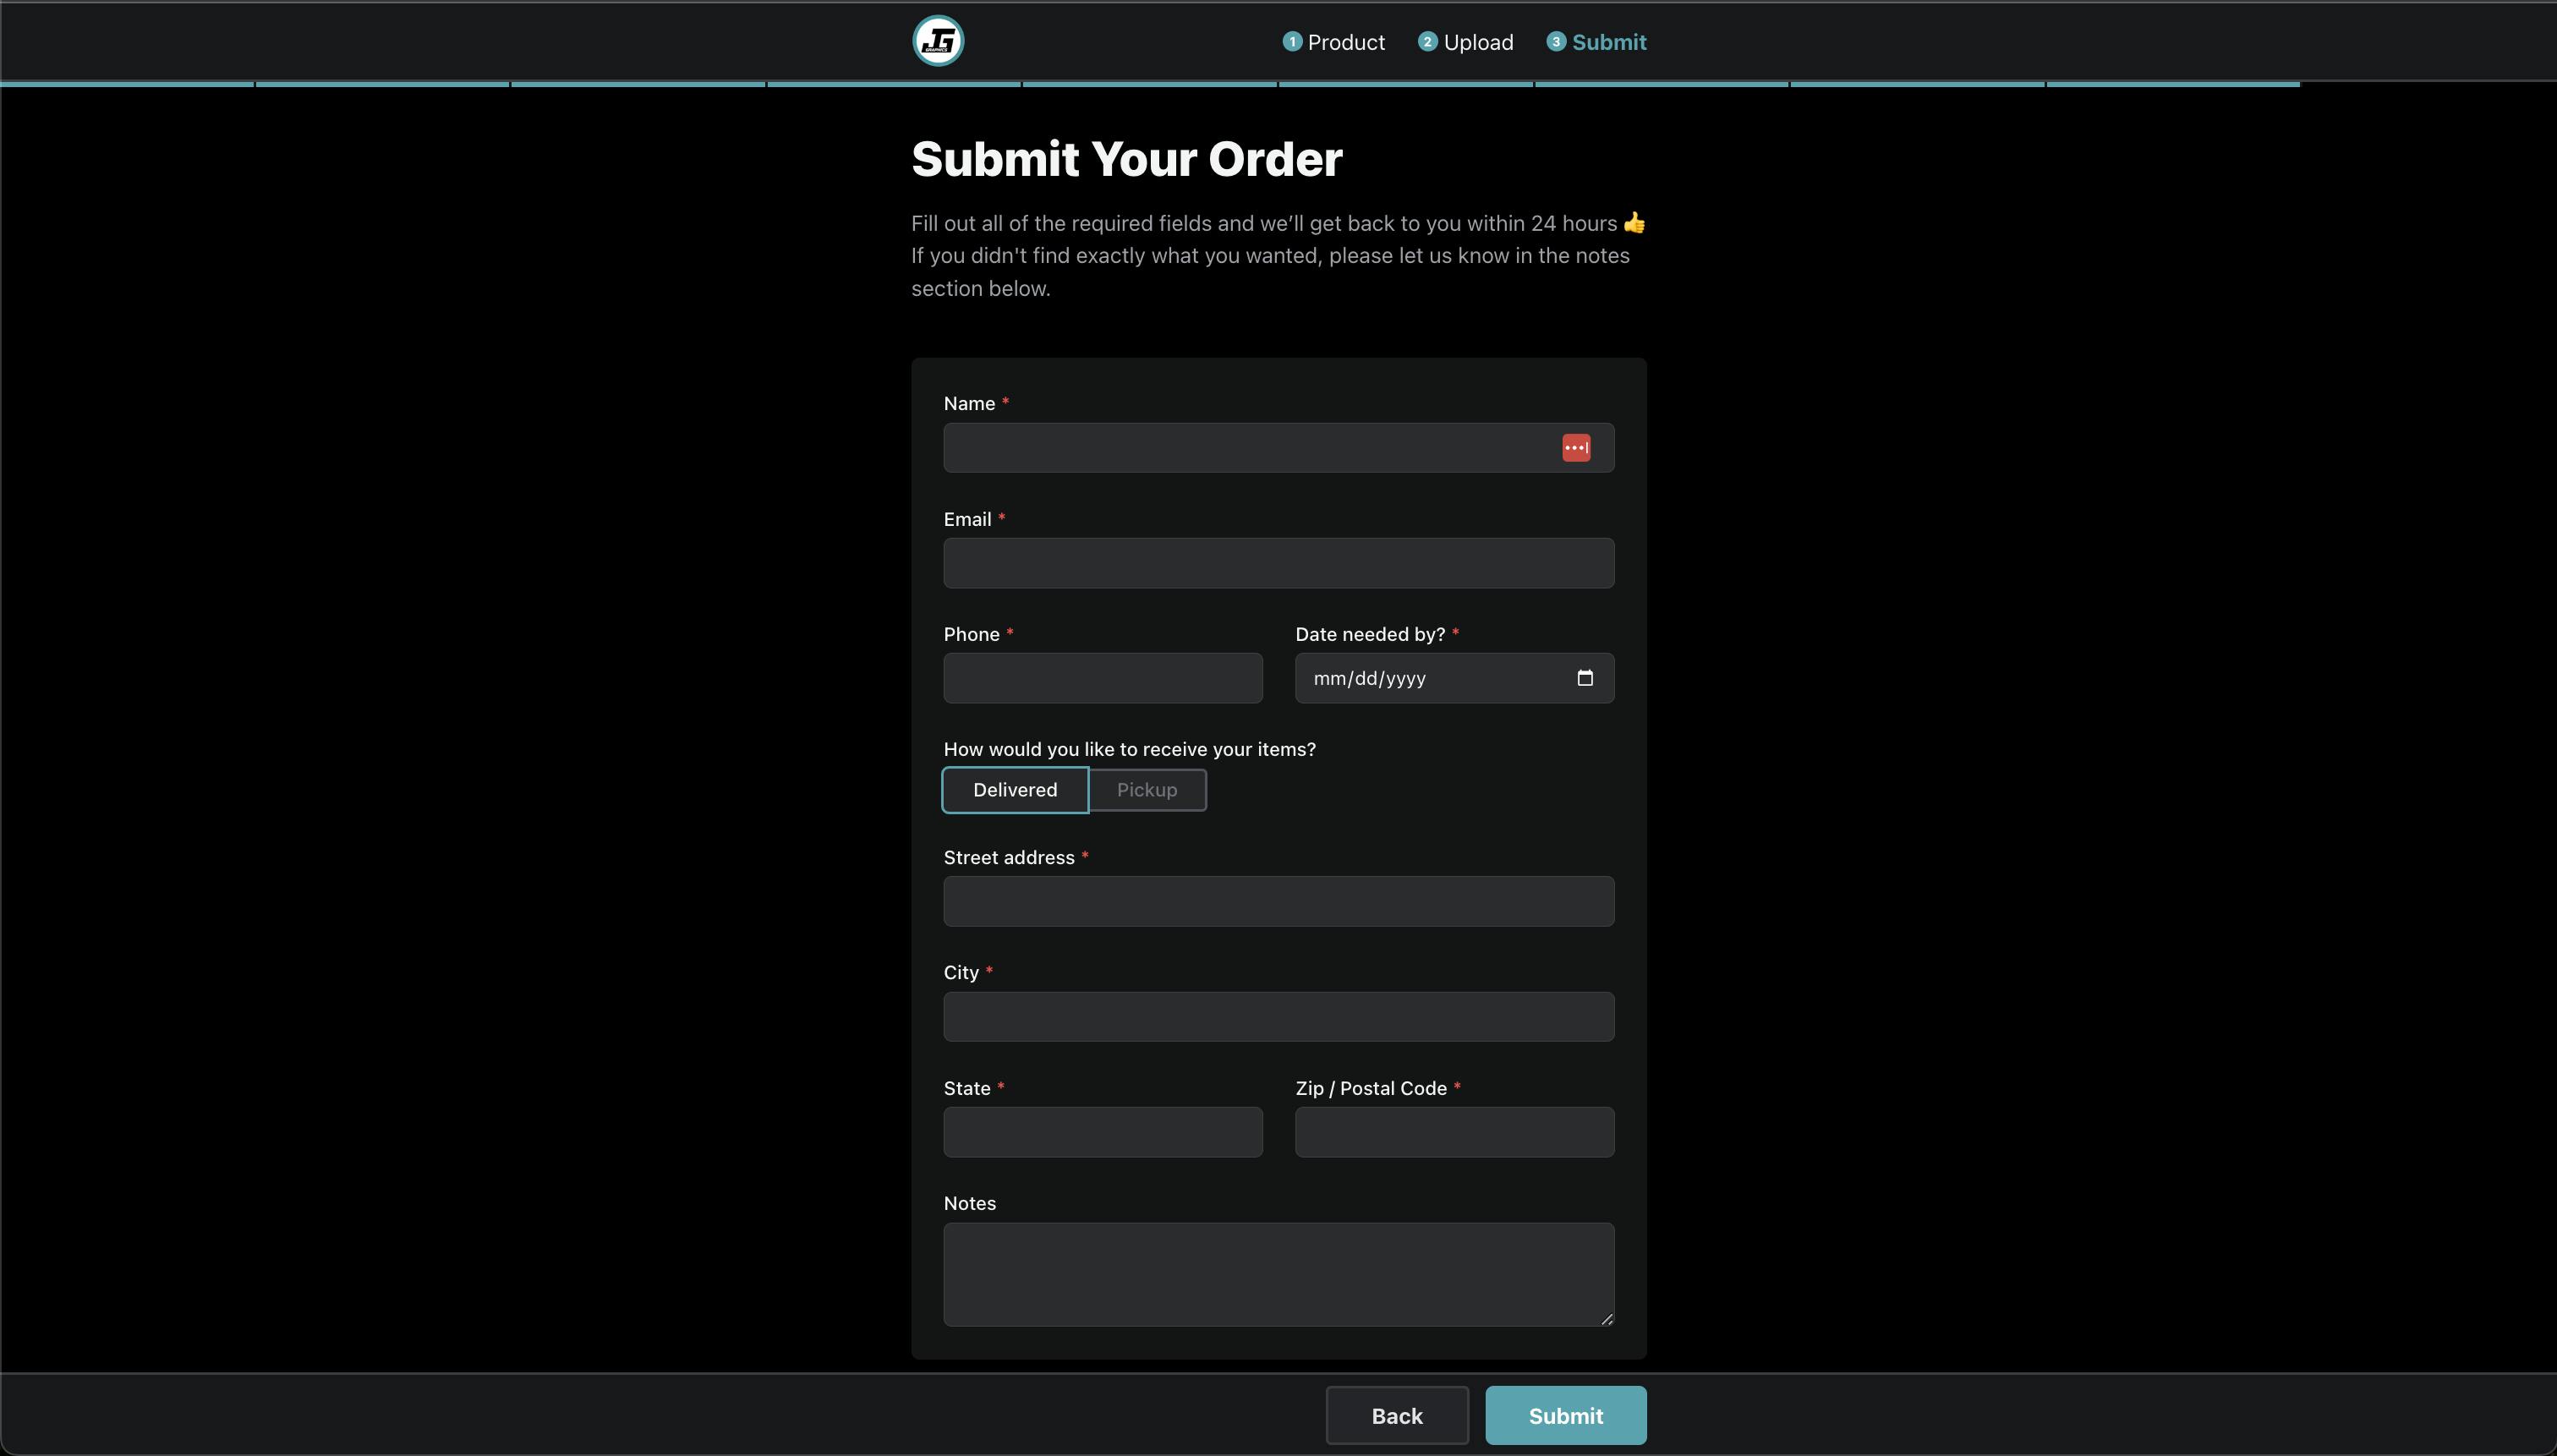 Last step in contact/order form to gather the user's information